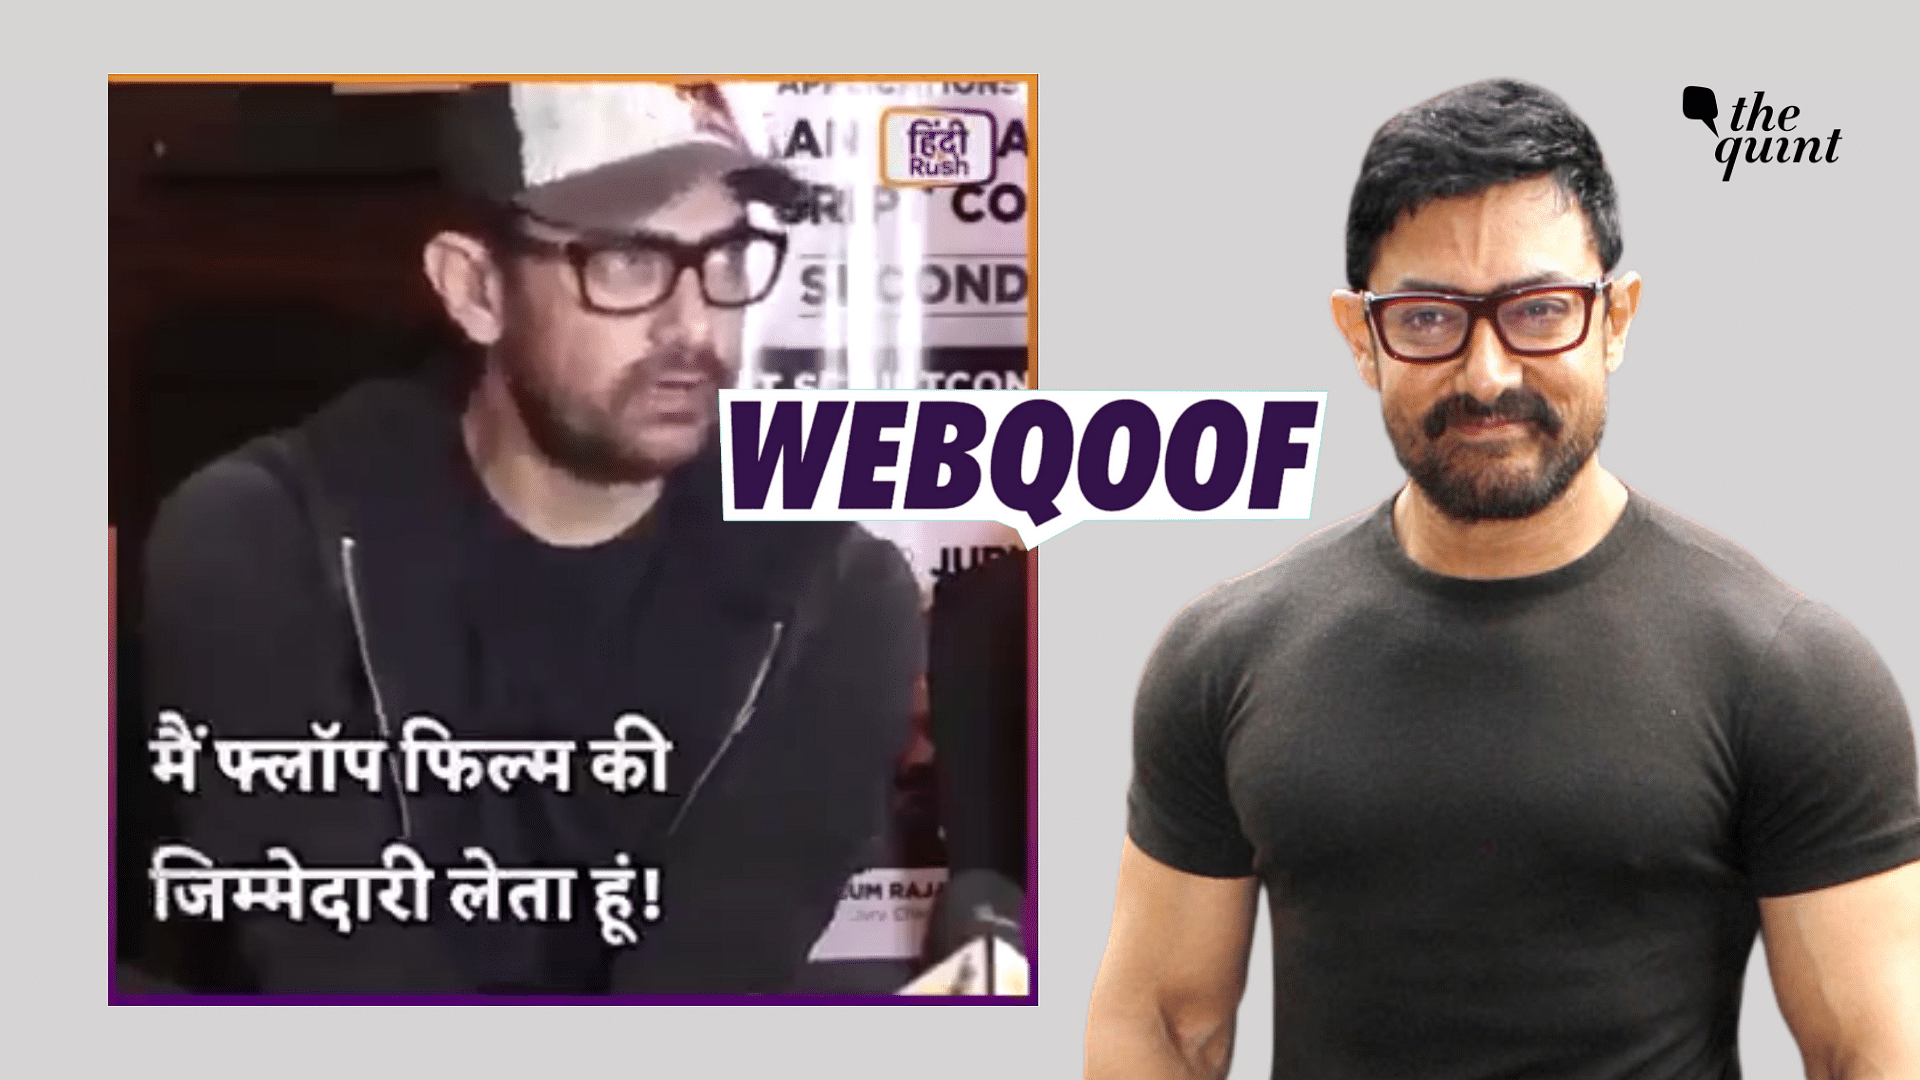 <div class="paragraphs"><p>Aamir Khan's video dates back to 2018, when he spoke about another one of his films called <em>Thugs of Hindostan</em>.</p></div>